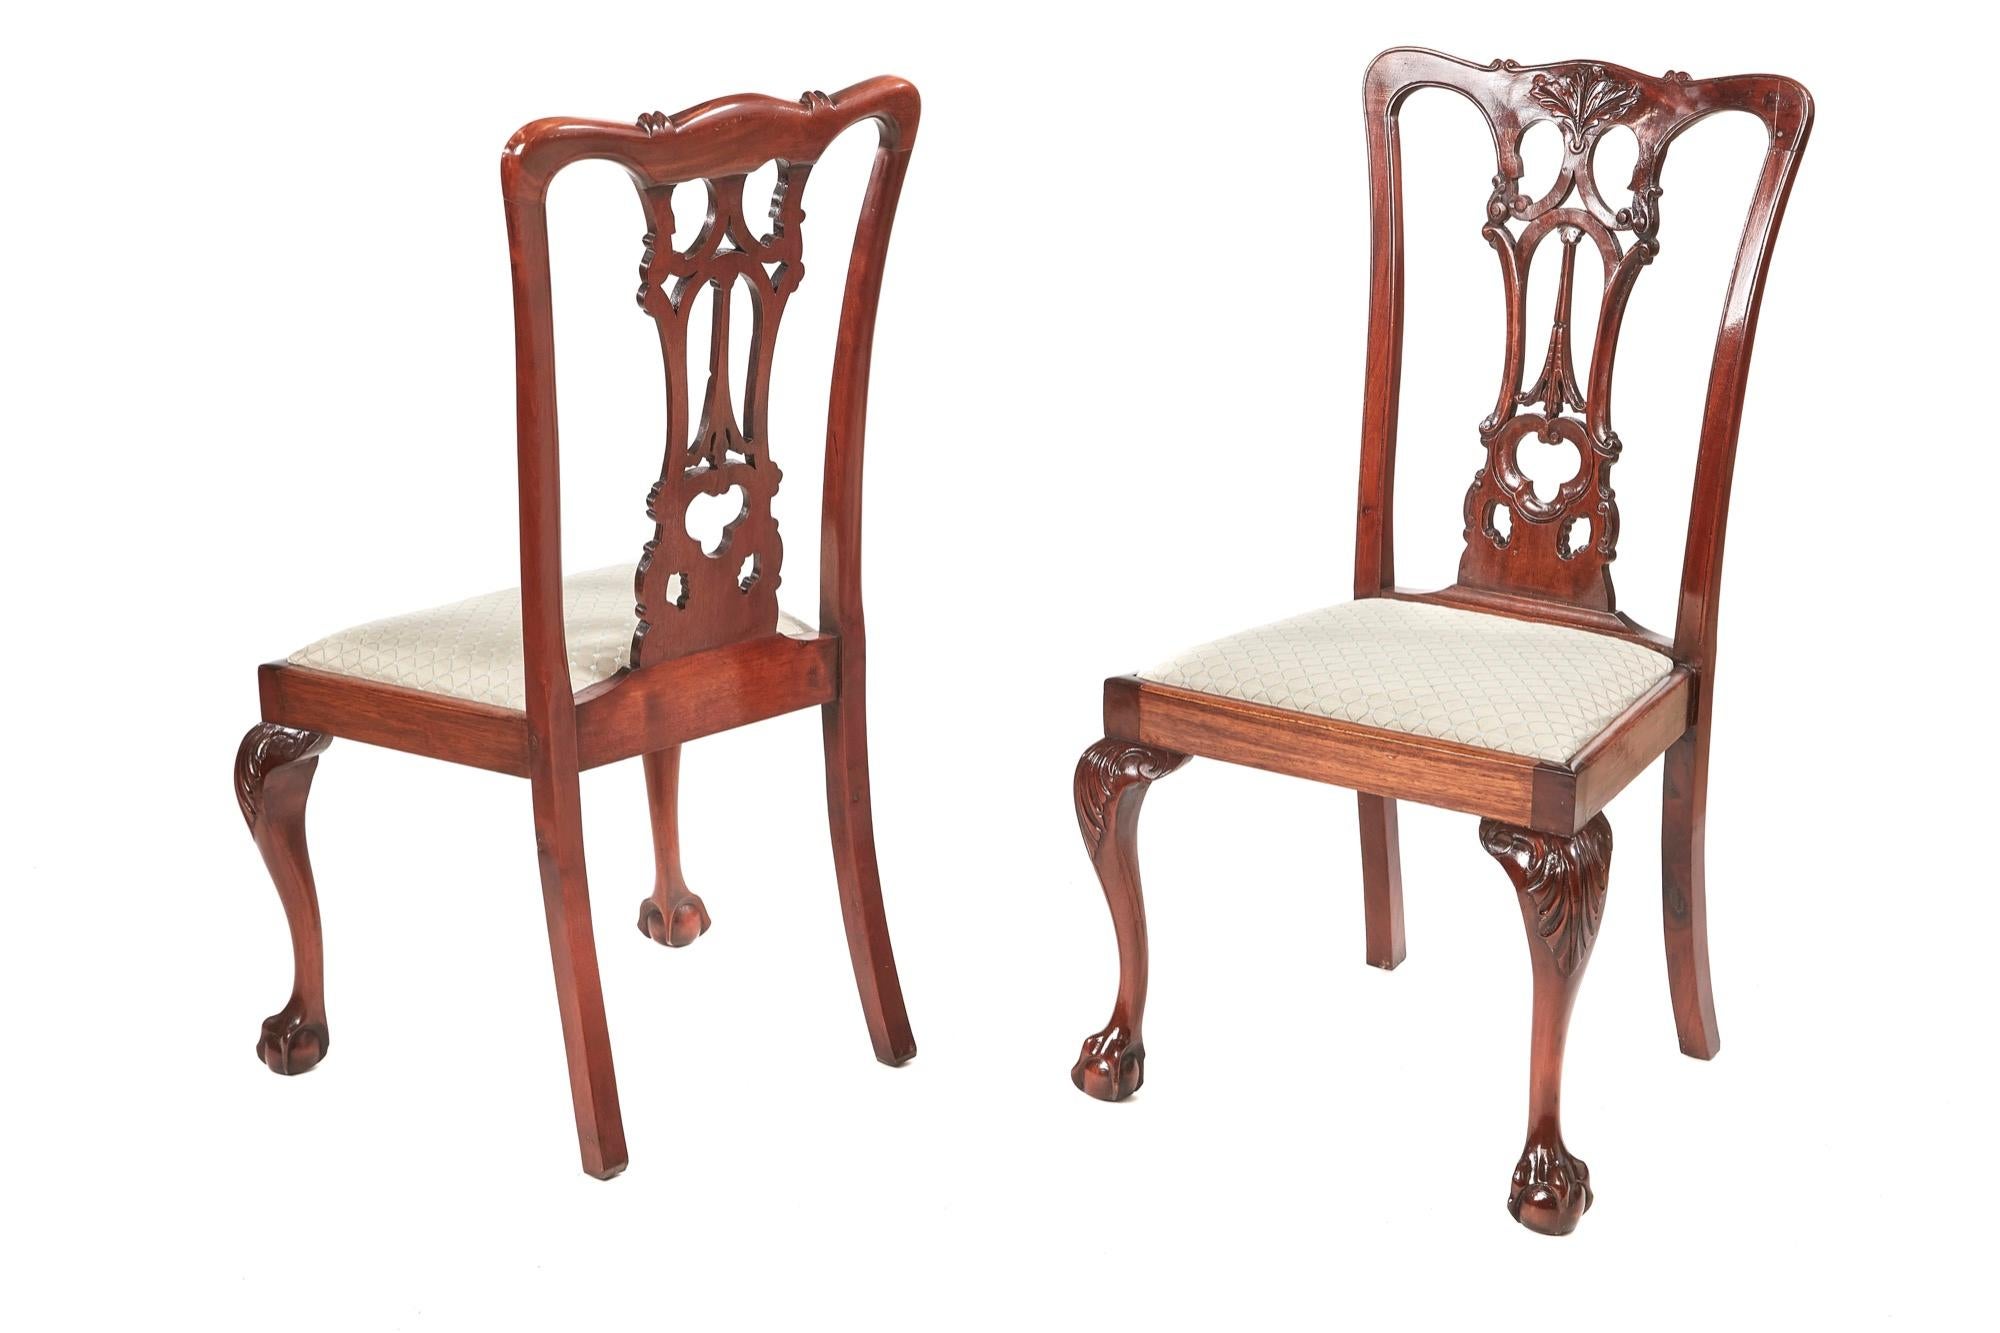 Pair of antique carved mahogany side chairs, with lovely carved shaped backs,drop in seats,standing on carved shaped cabriole legs with claw and ball feet to the front outswept back legs
lovely color and condition
22